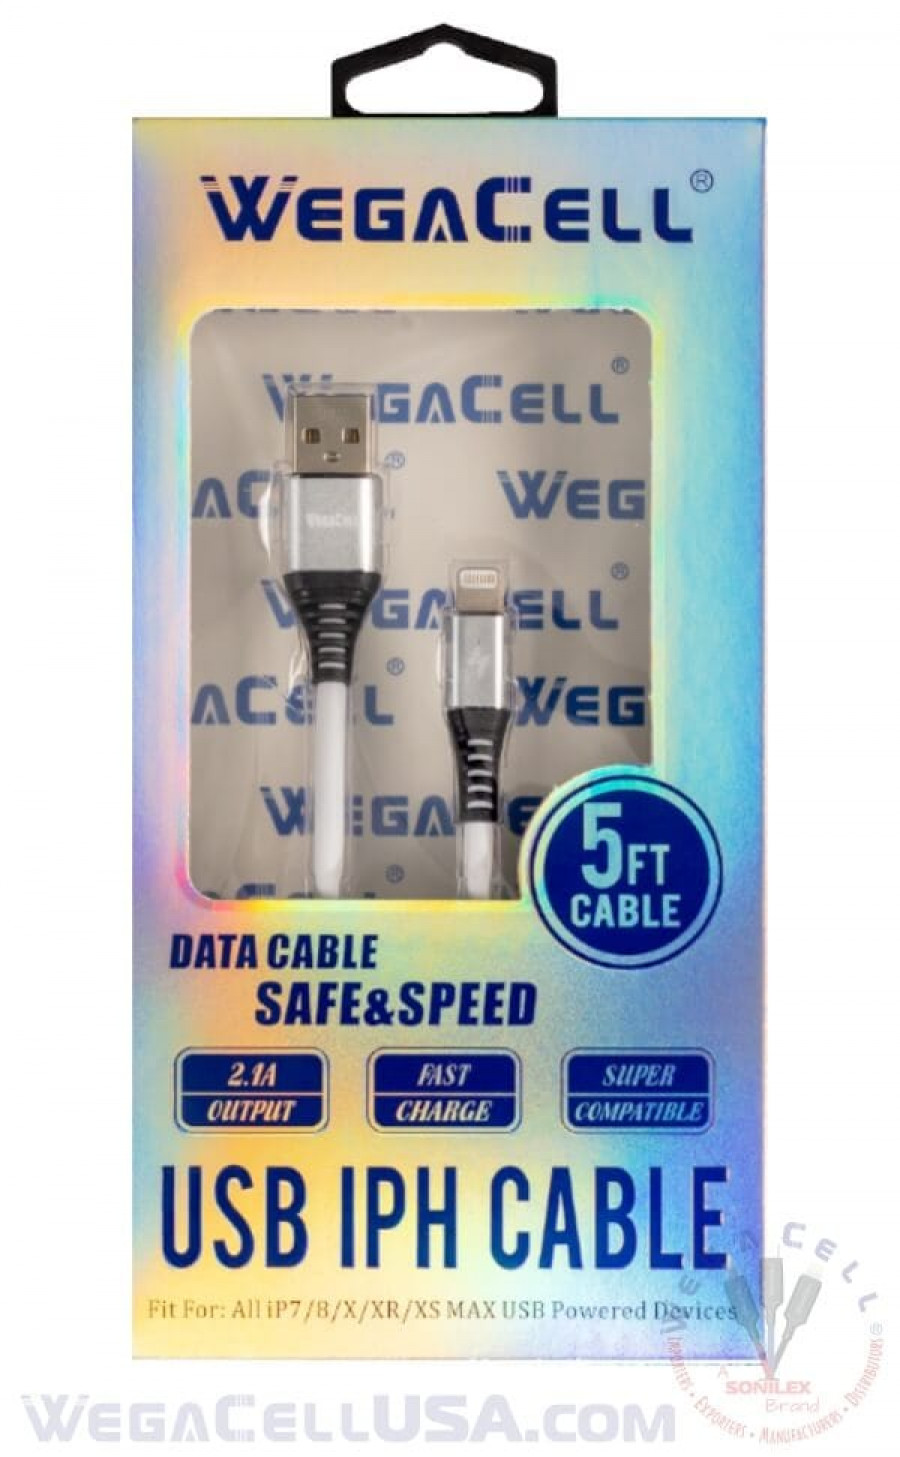 apple compatible fast charging 5 ft lightning tpe data cable - wholesale pkg. wegacell: wl-5cbl12-iph data cable 22